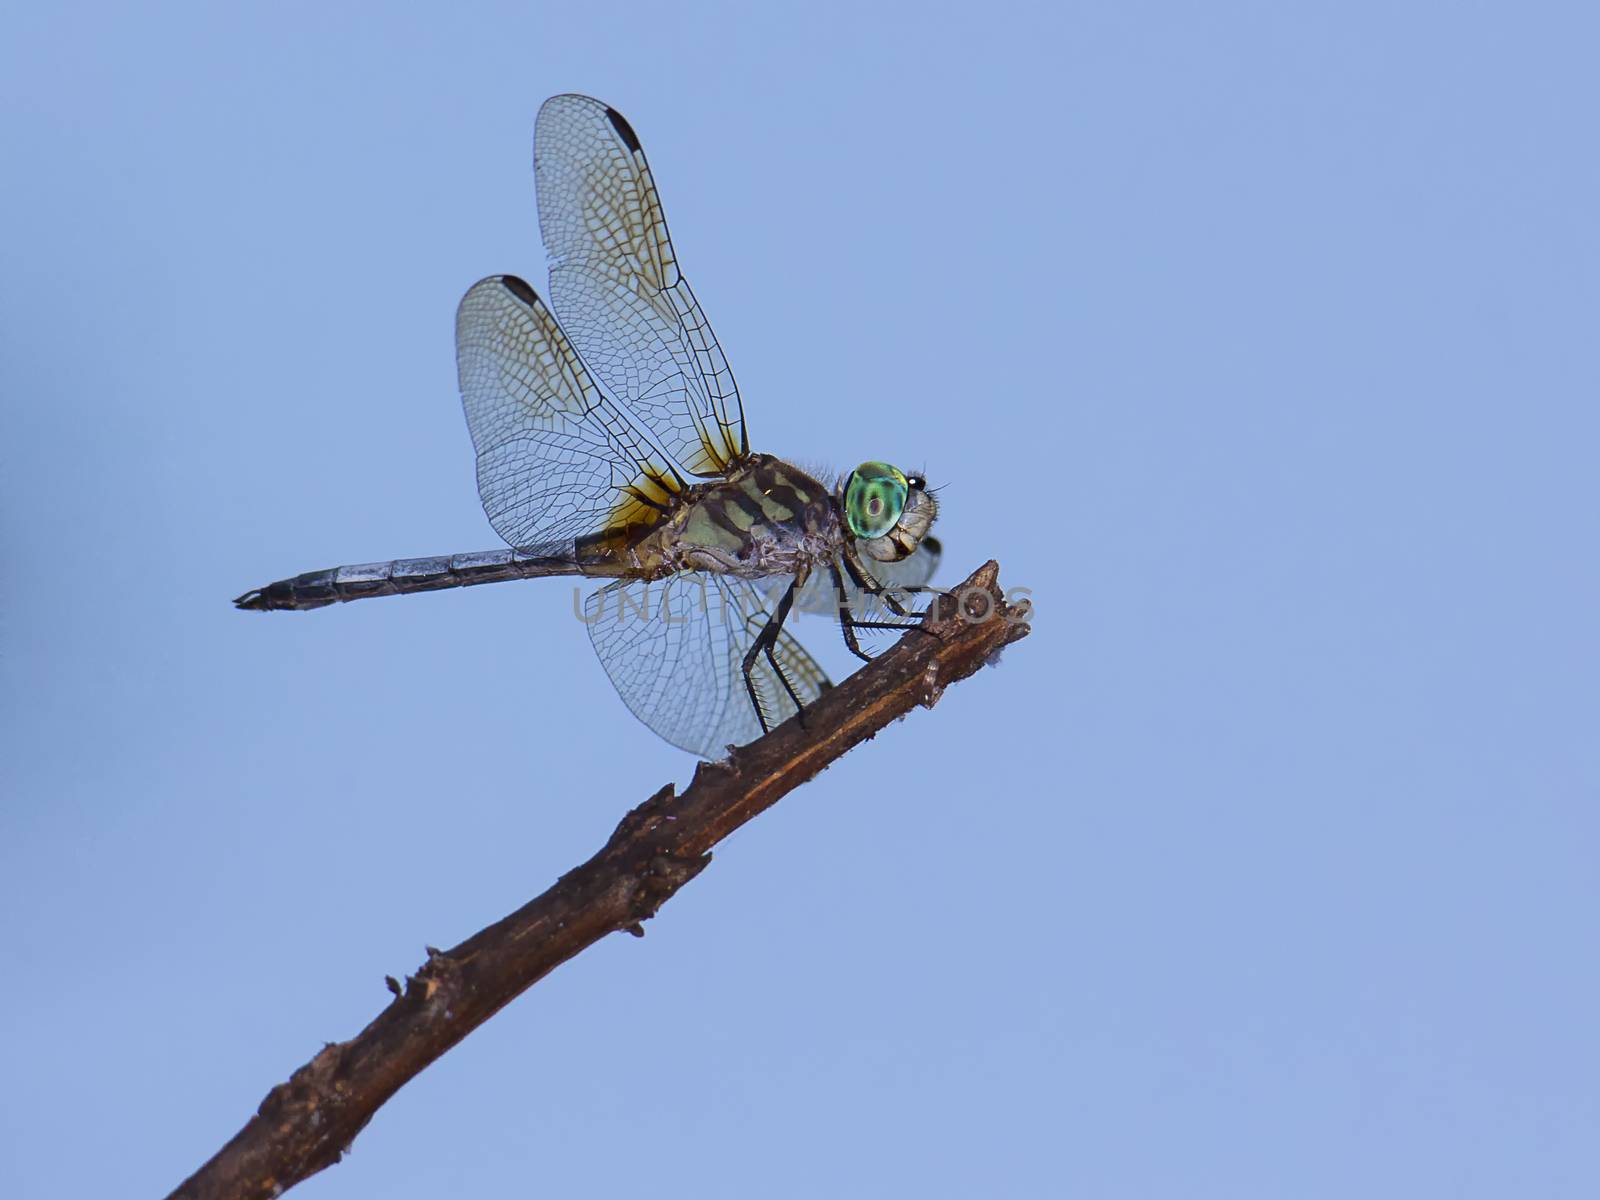 Dragonfly perches on limb by CharlieFloyd